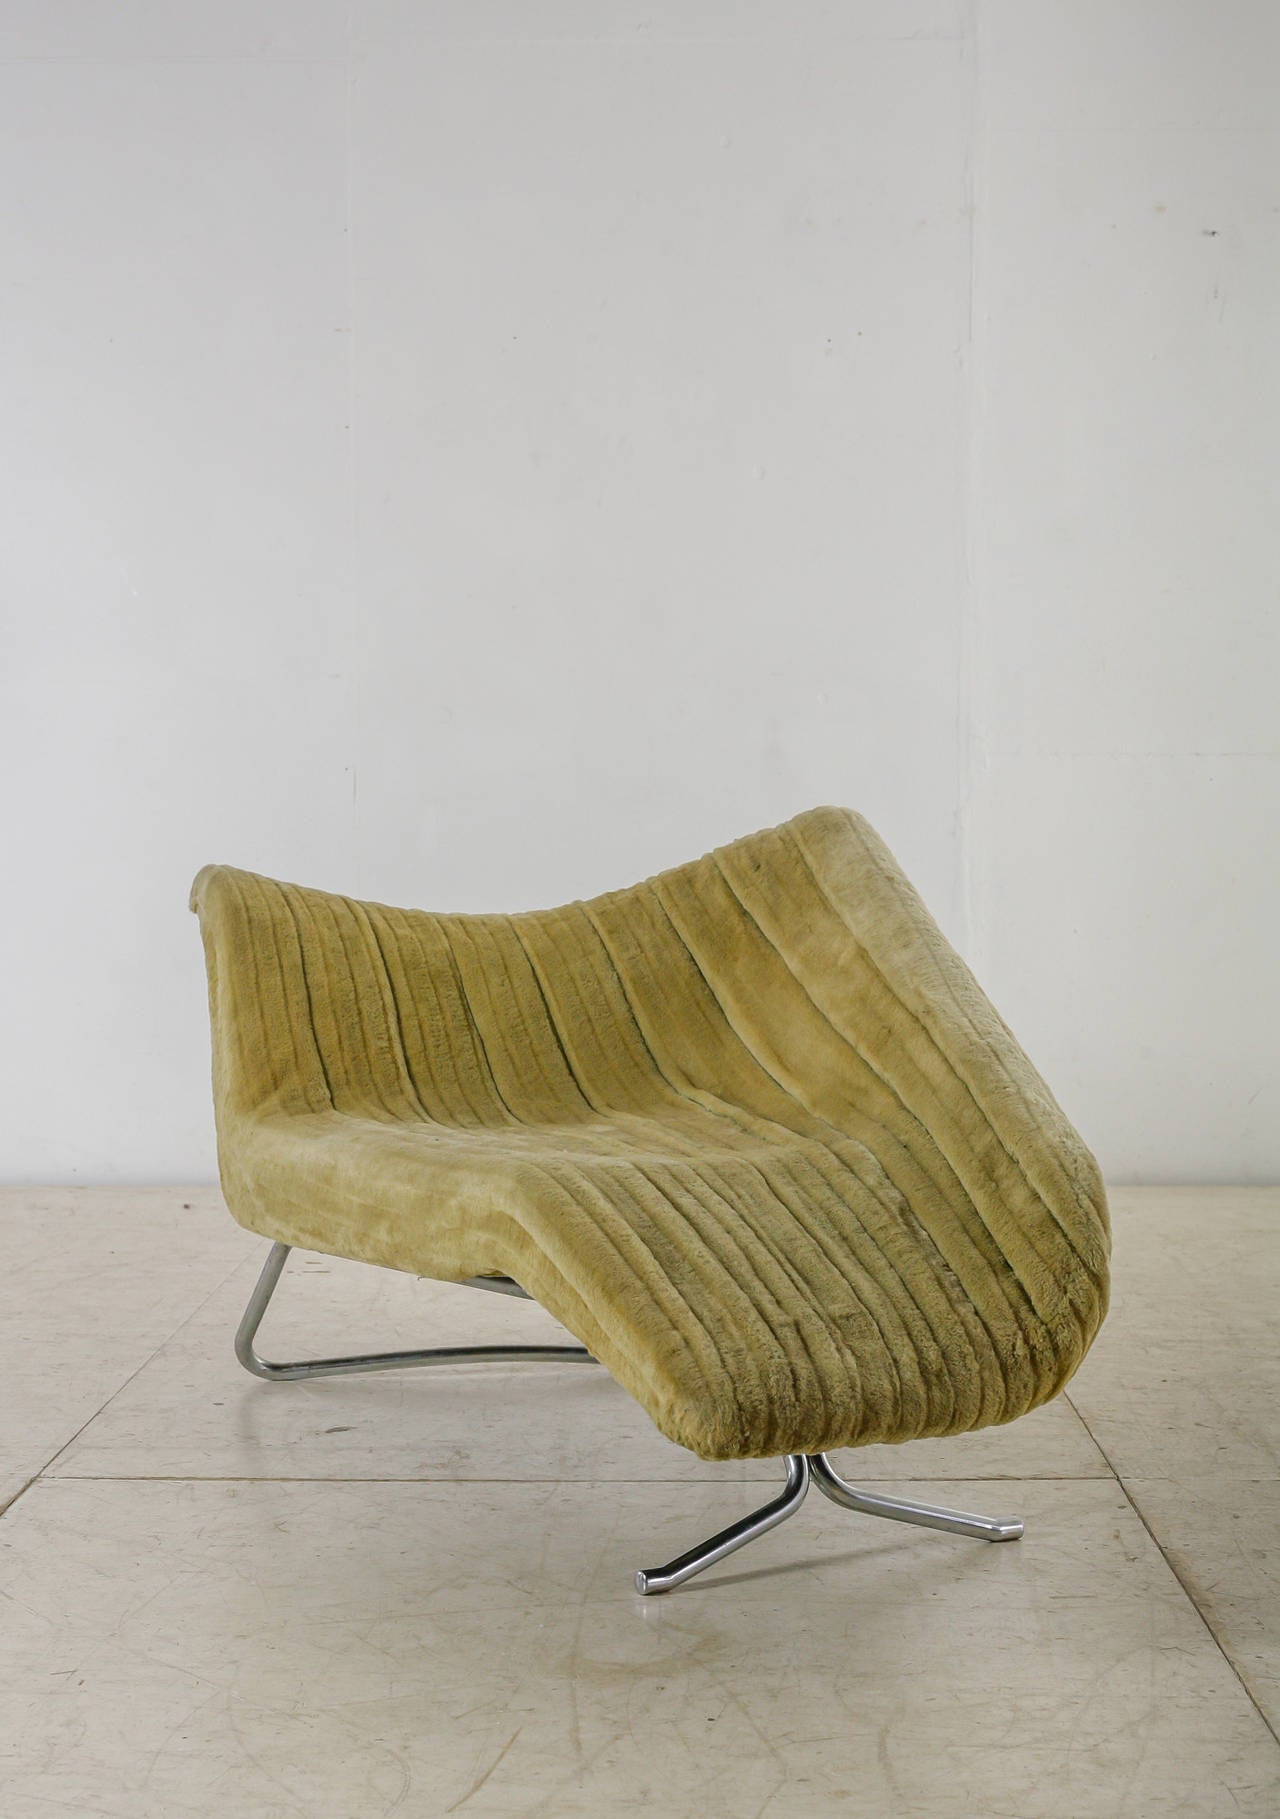 A rare sculptural chaise longue from the 1950s by Danish designer Hans Hartl. The chair is made of a tubular chrome frame with an olive green velour upholstery.

Both the frame and fabric are in a good vintage condition, but the foam needs to be